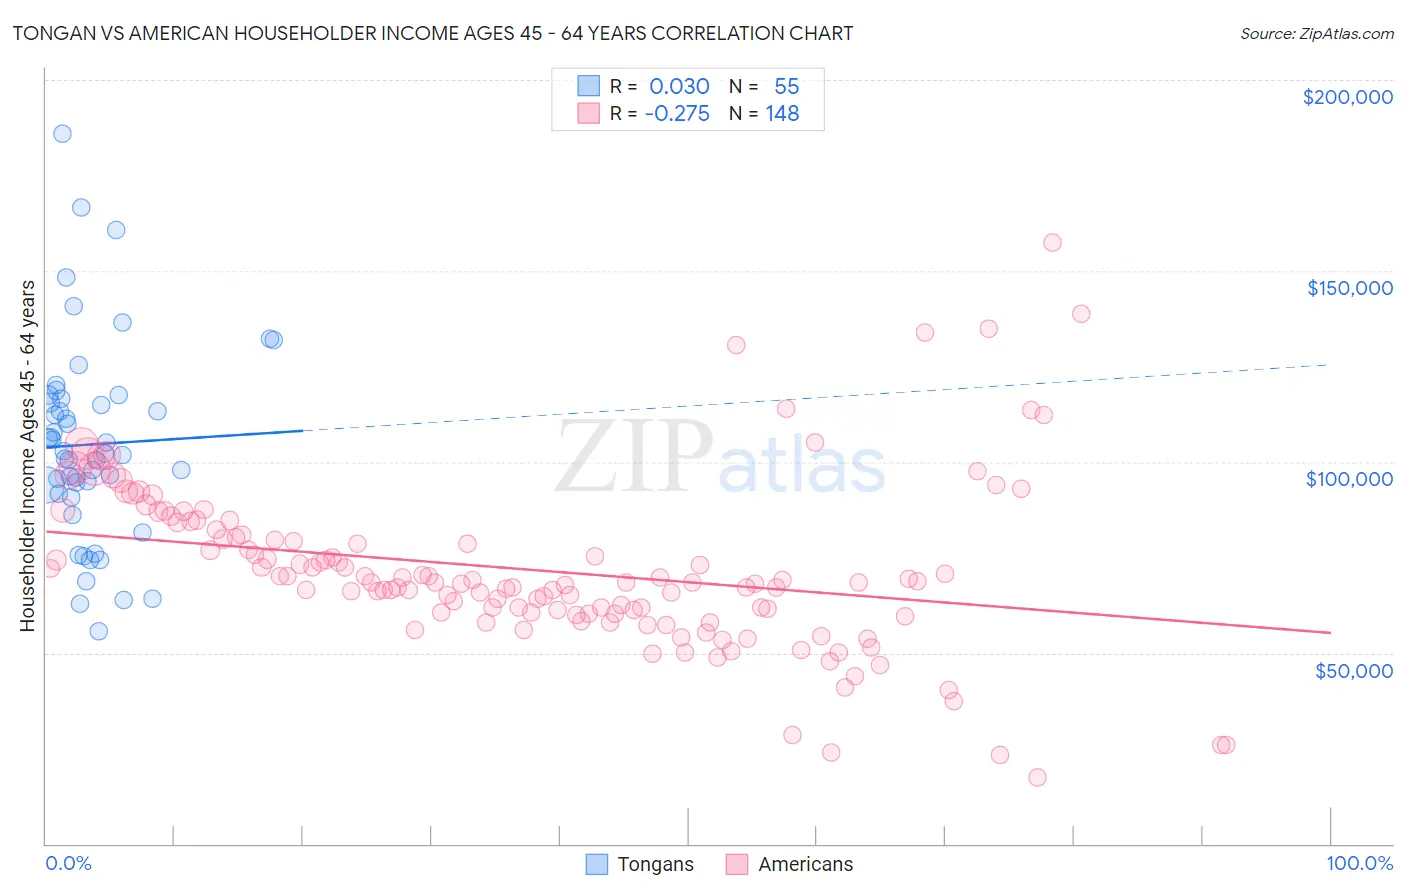 Tongan vs American Householder Income Ages 45 - 64 years